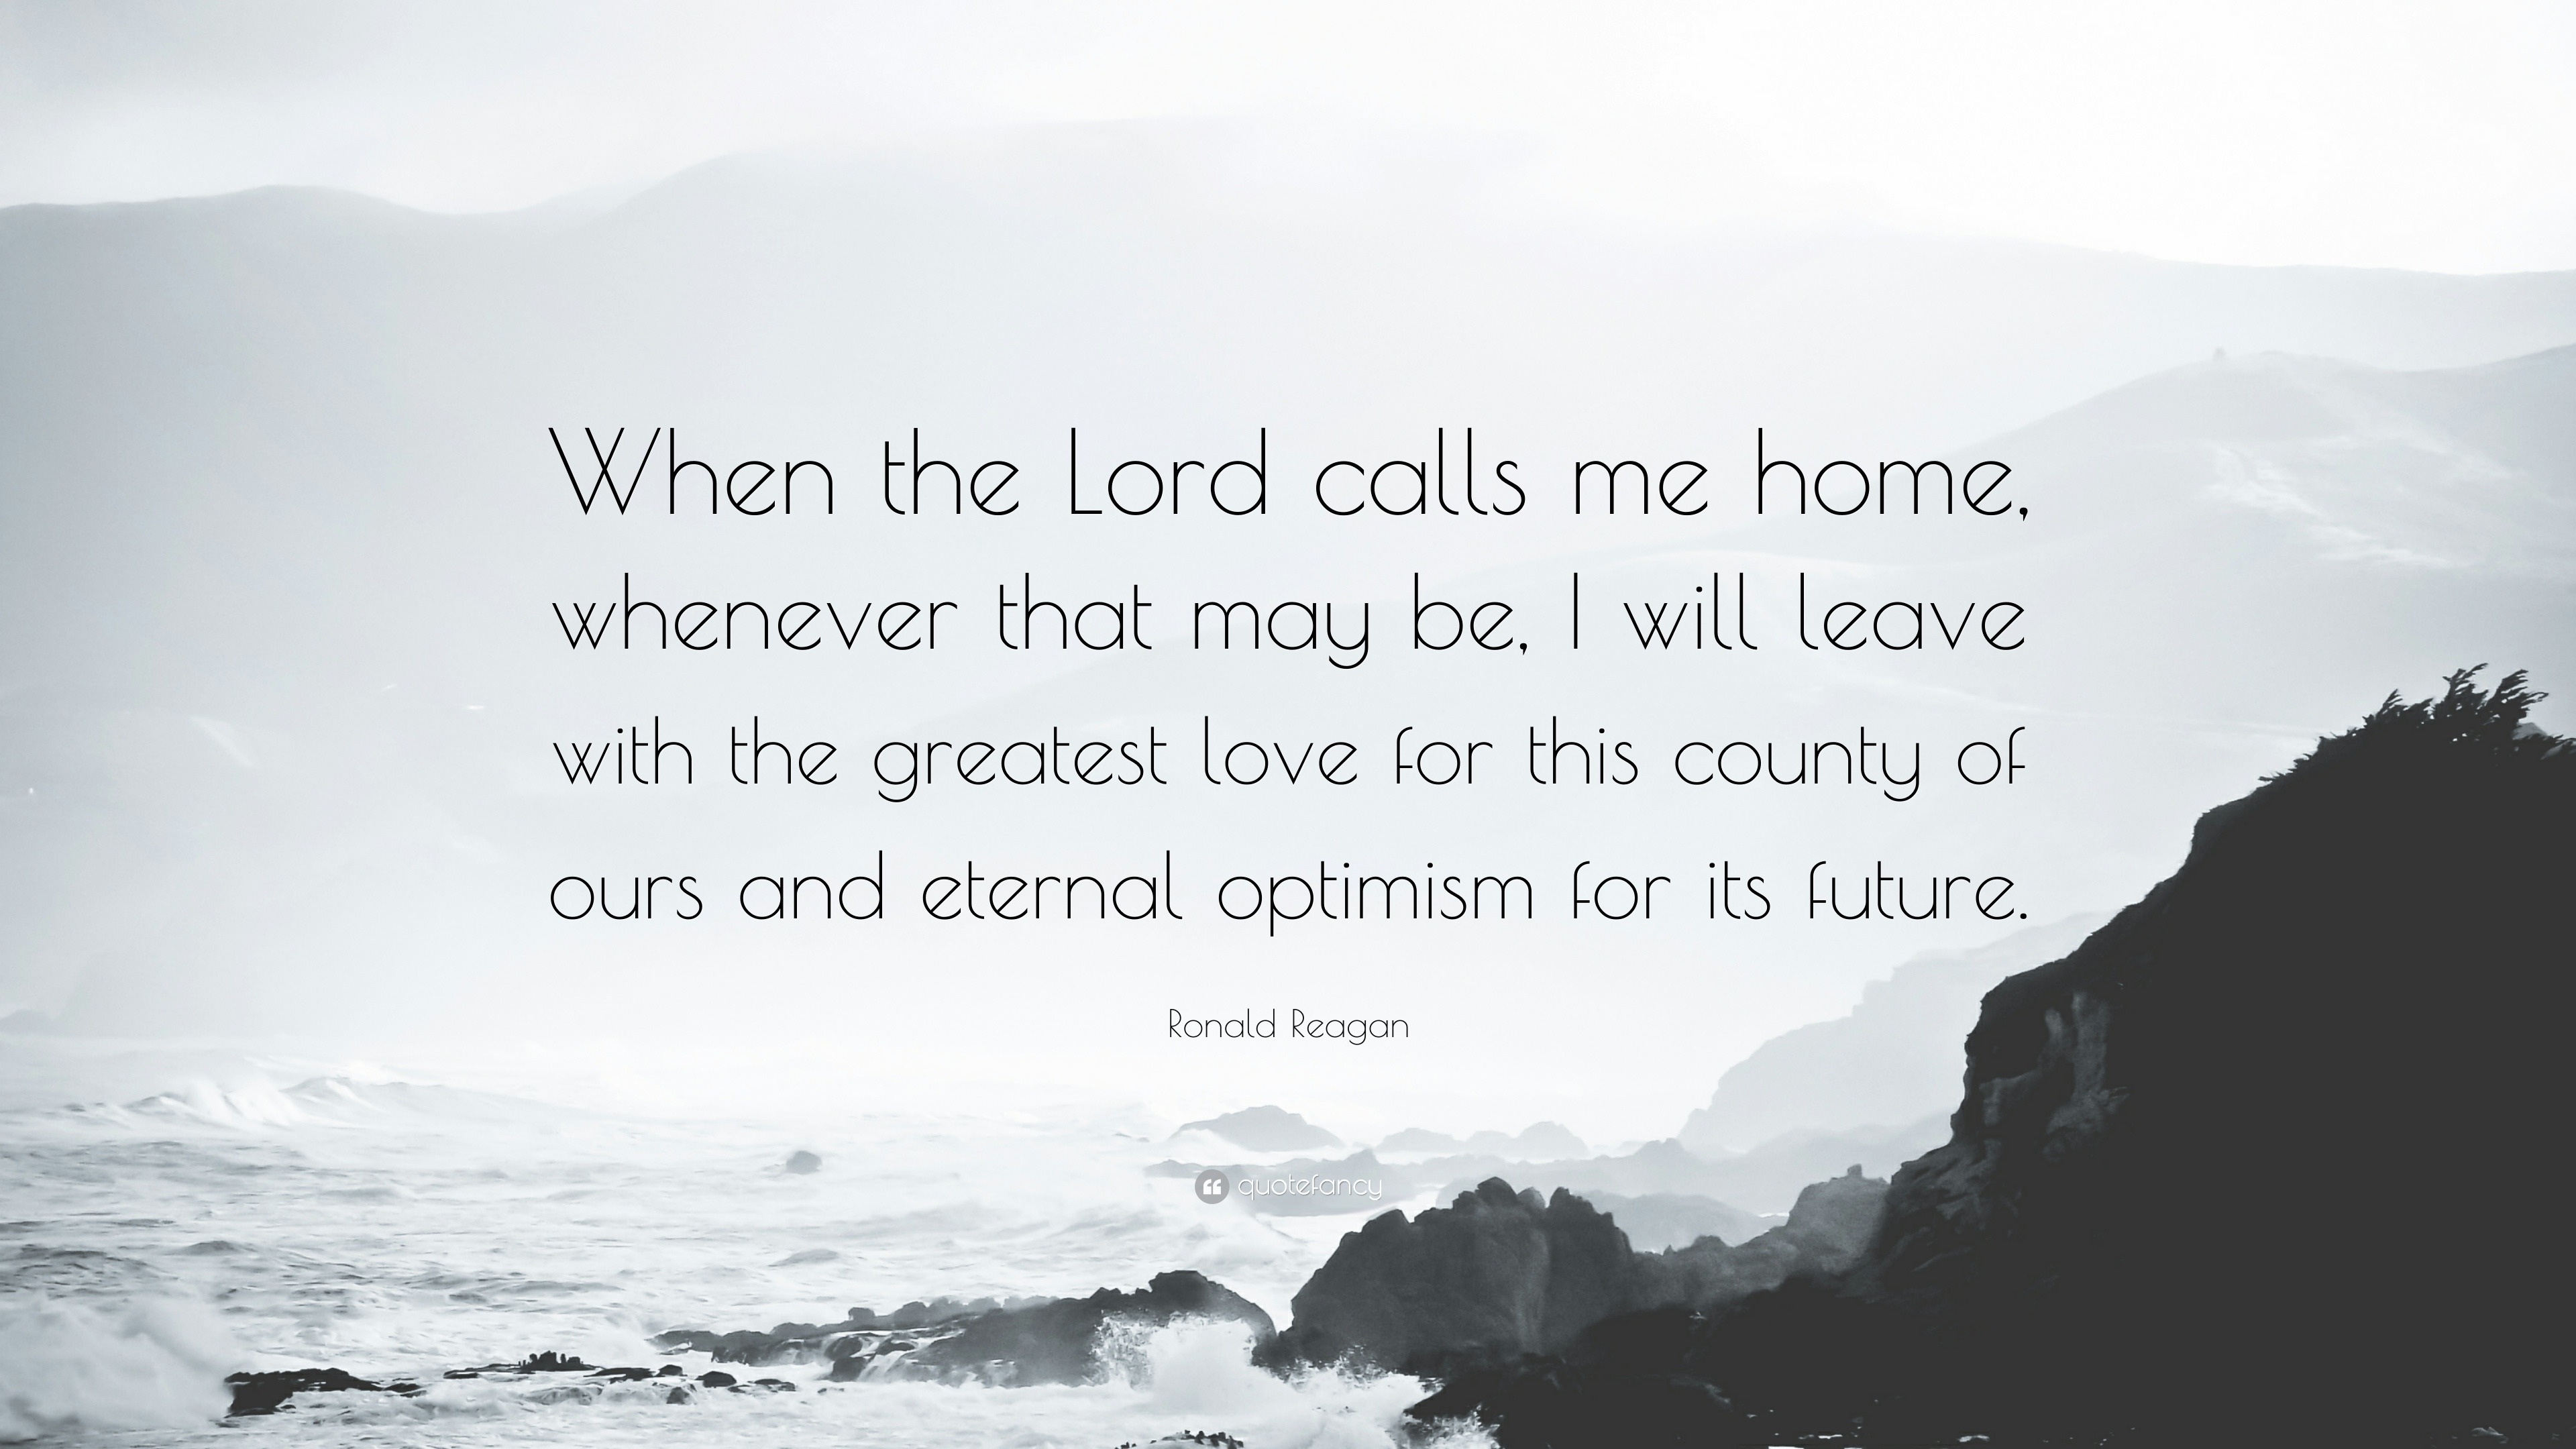 Ronald Reagan Quote “When the Lord calls me home whenever that may be